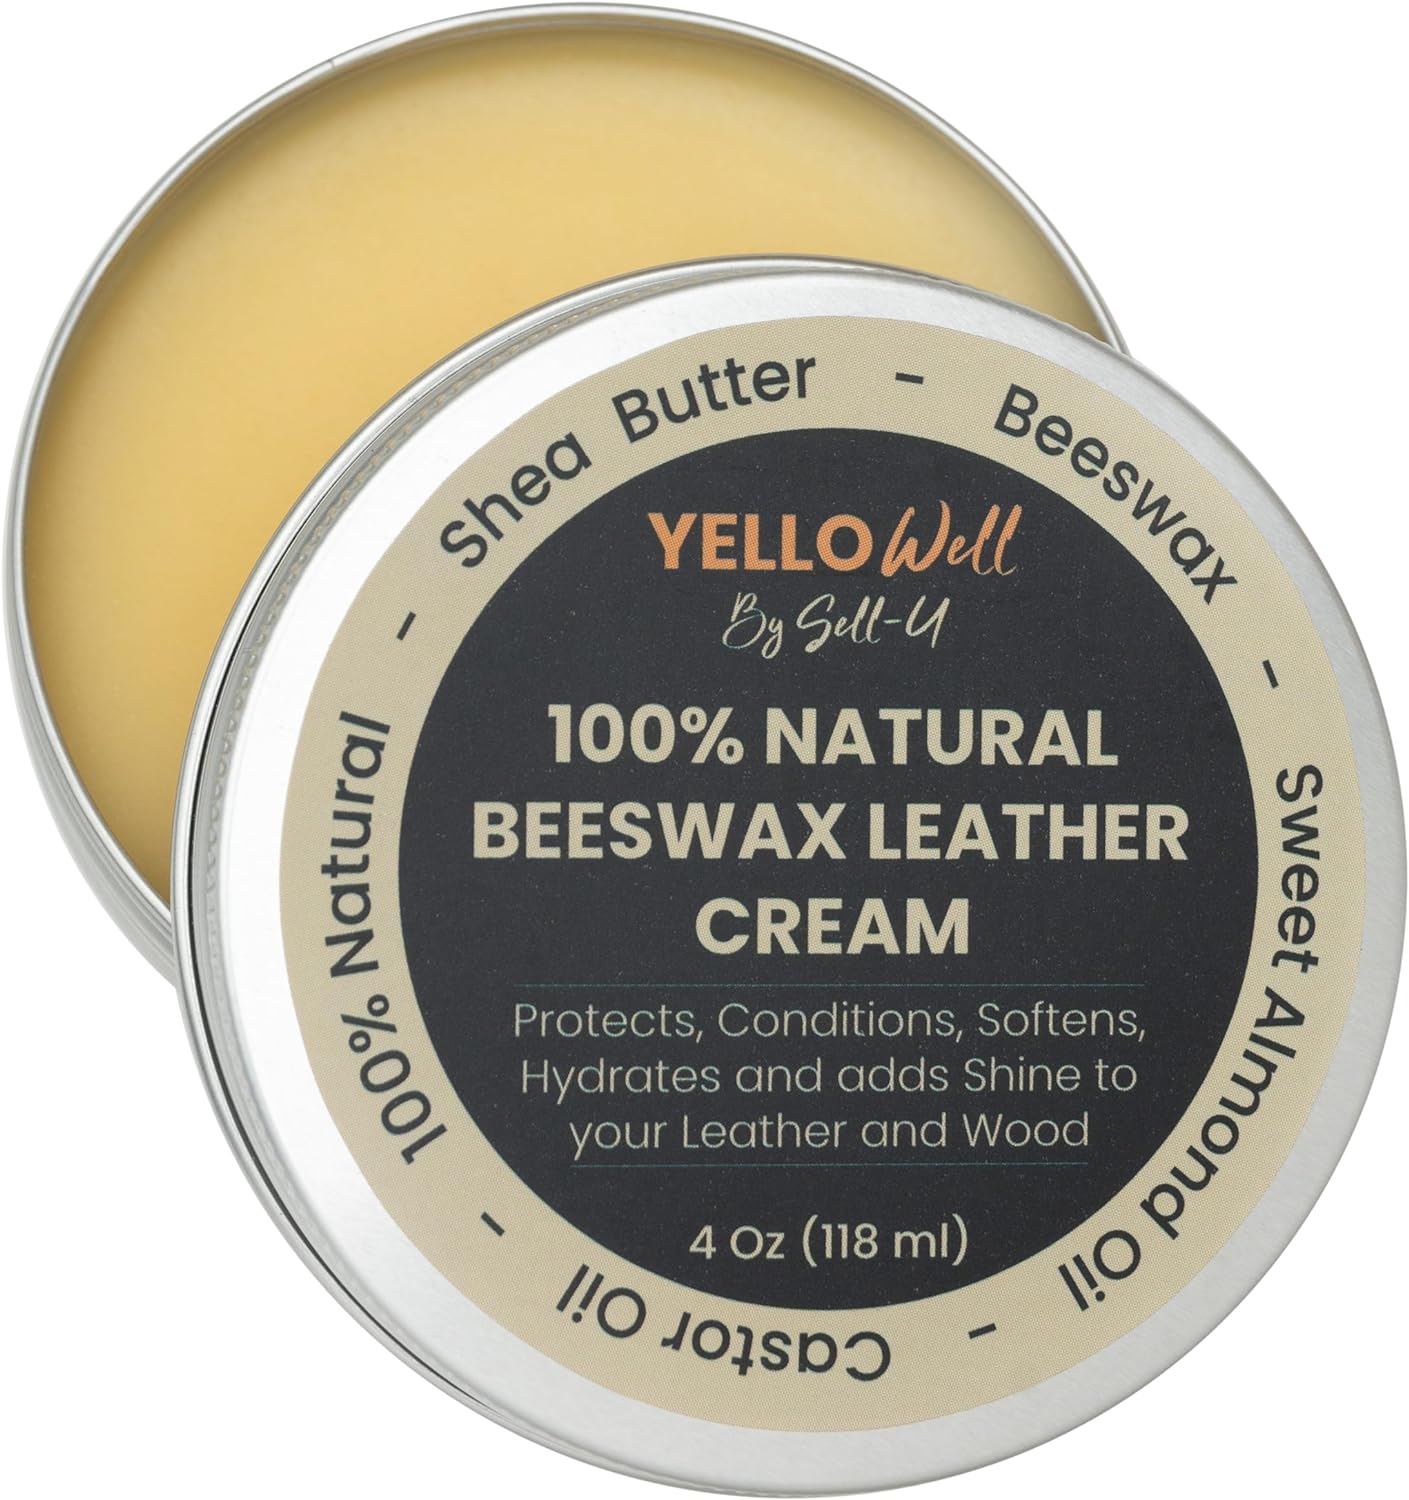 | Natural Beeswax Leather Cream | 4 oz | Beeswax - Shea Butter - Sweet Almond Oil & Castor Oil | Restore, Soften and Protect Leather & Wood |